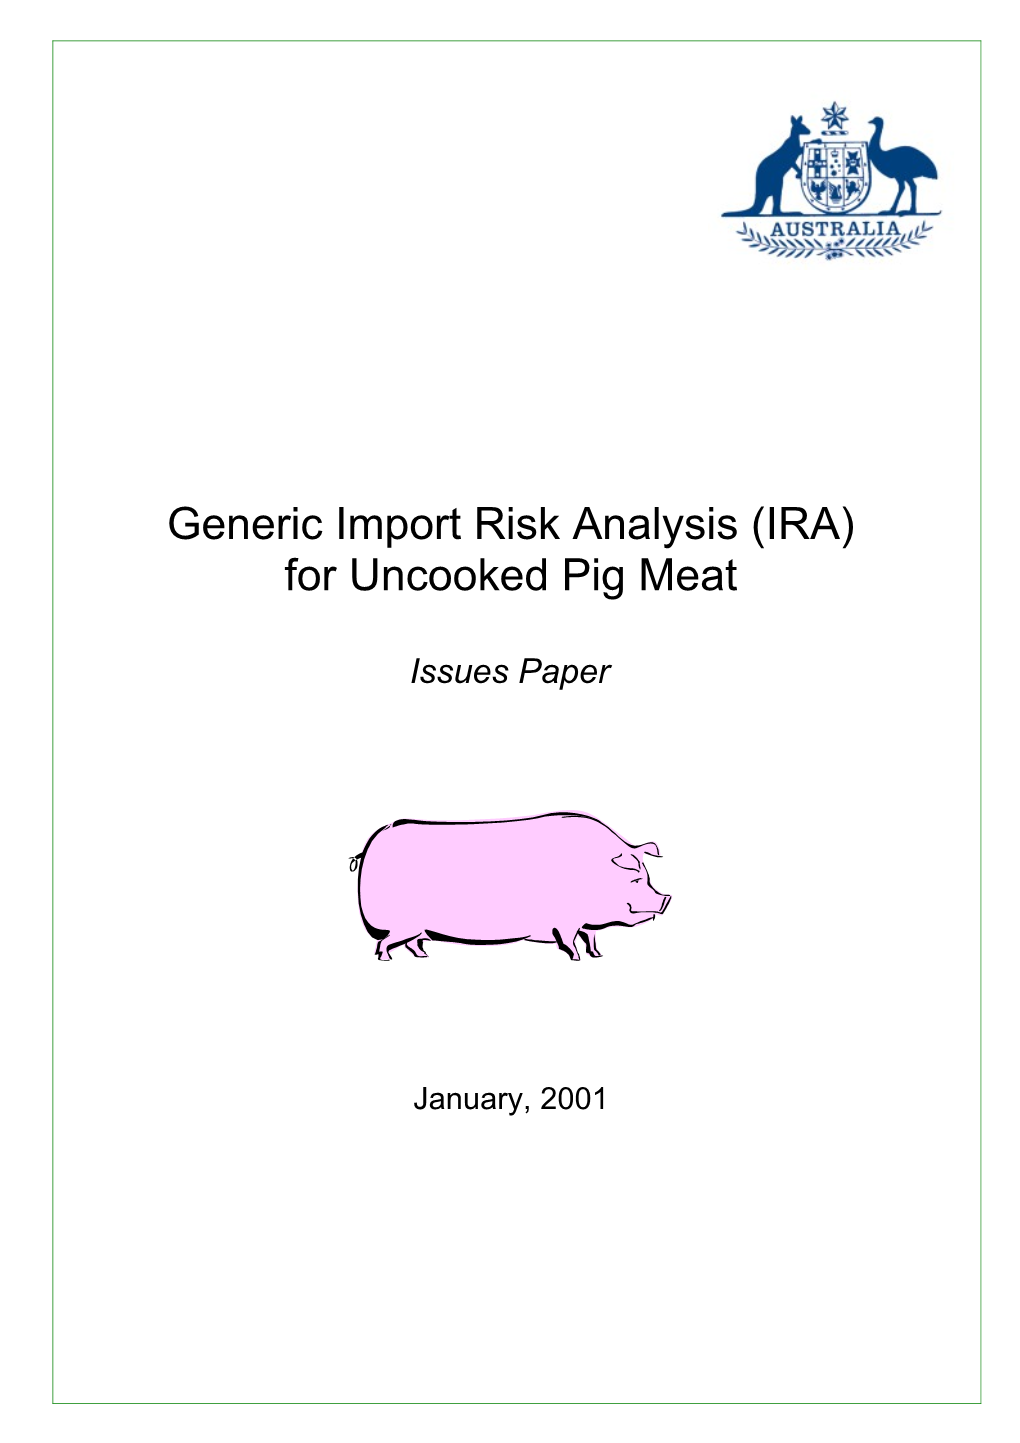 Generic Import Risk Analysis (IRA) for Uncooked Pig Meat